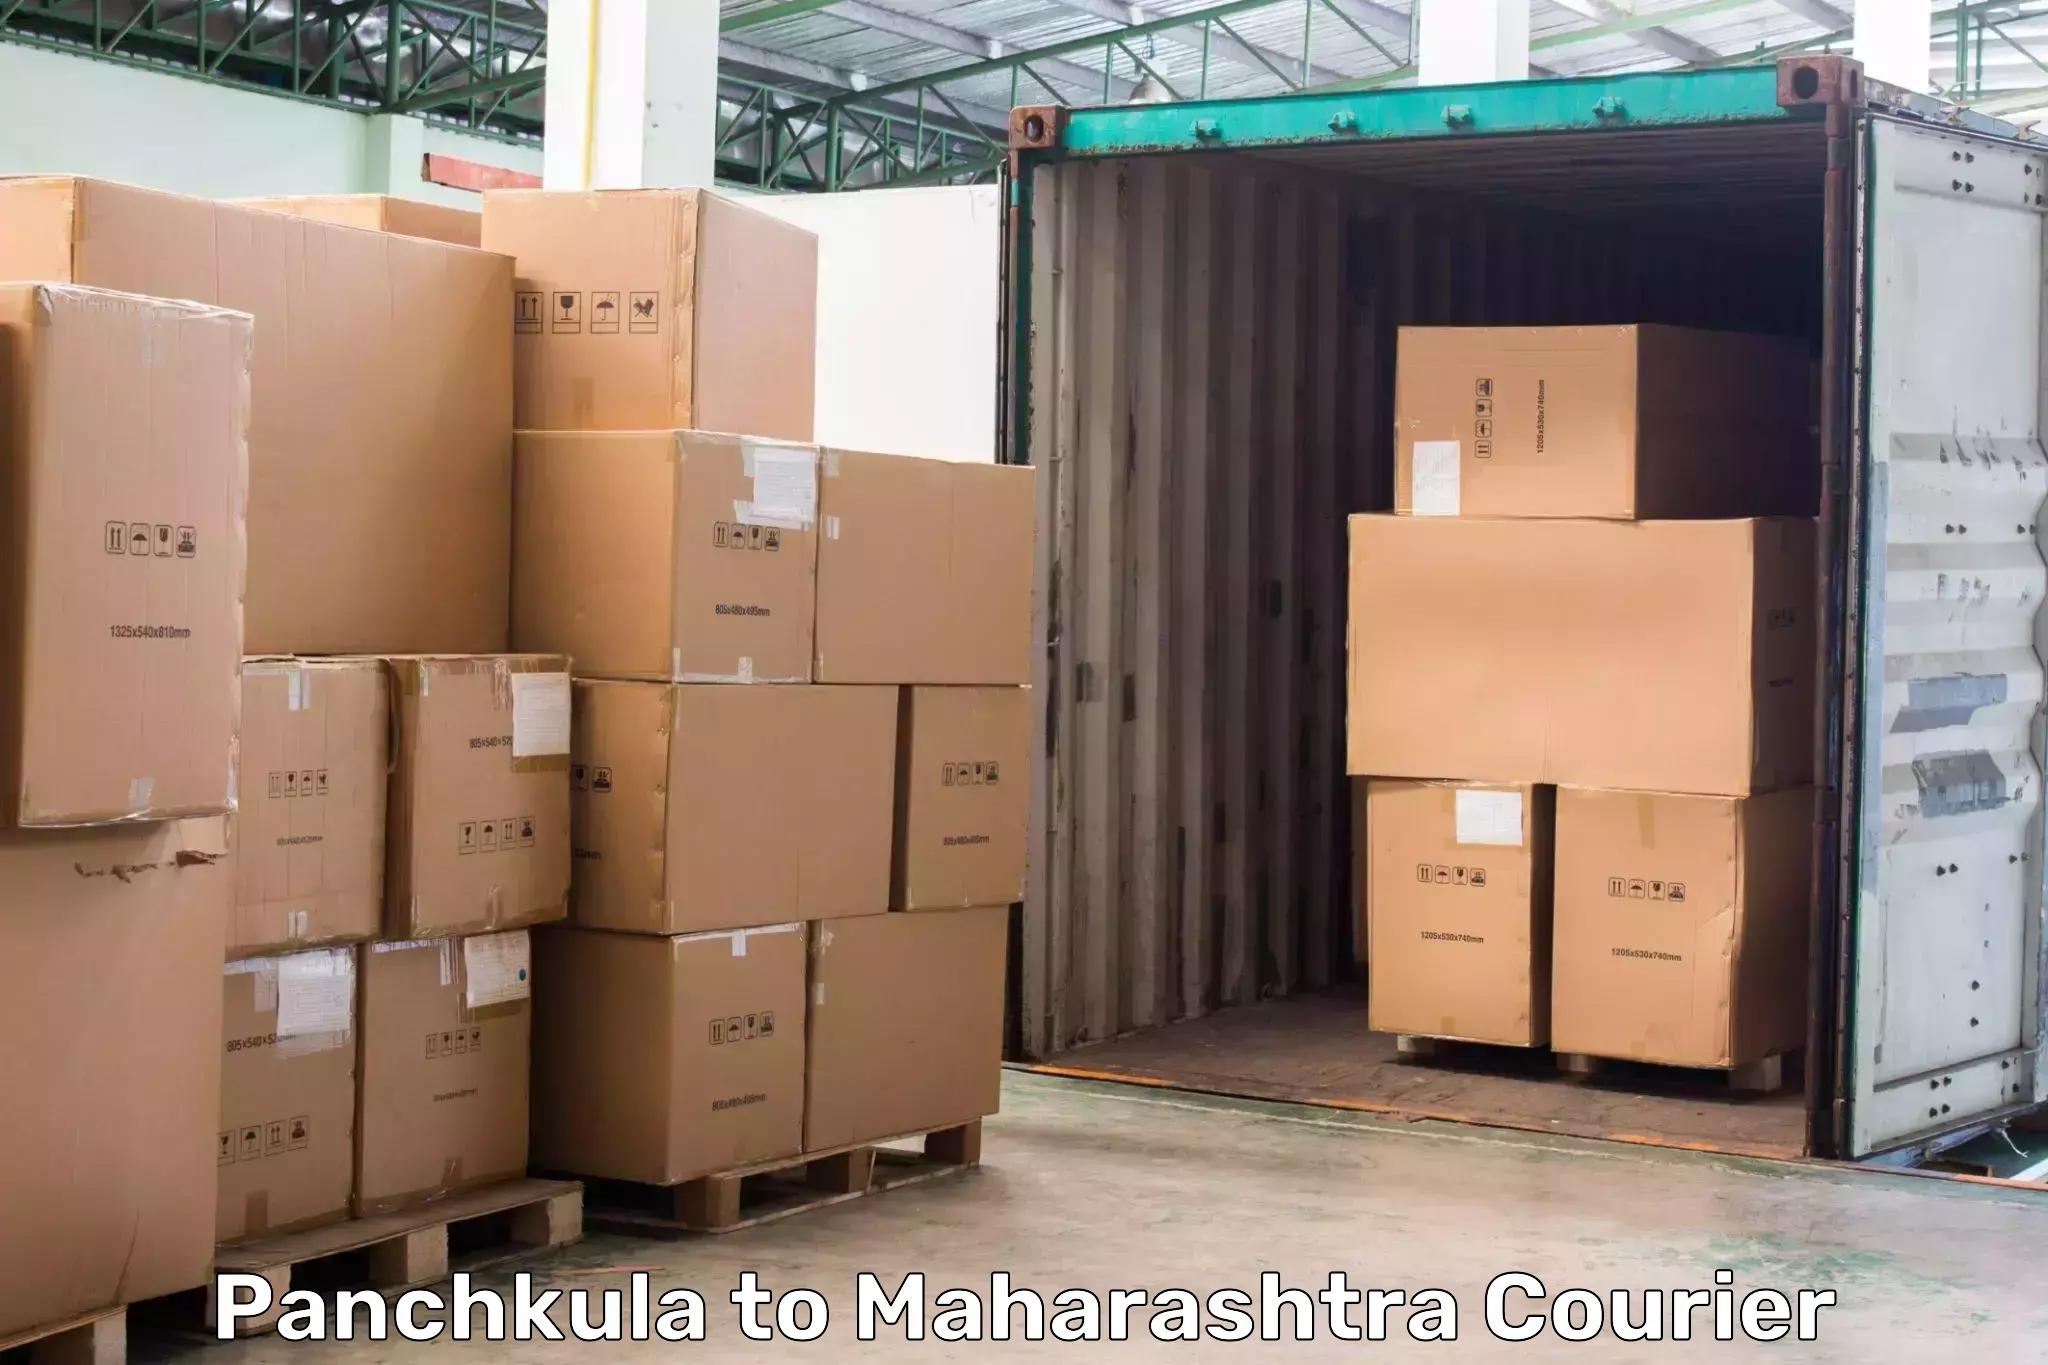 End-to-end delivery Panchkula to Chembur